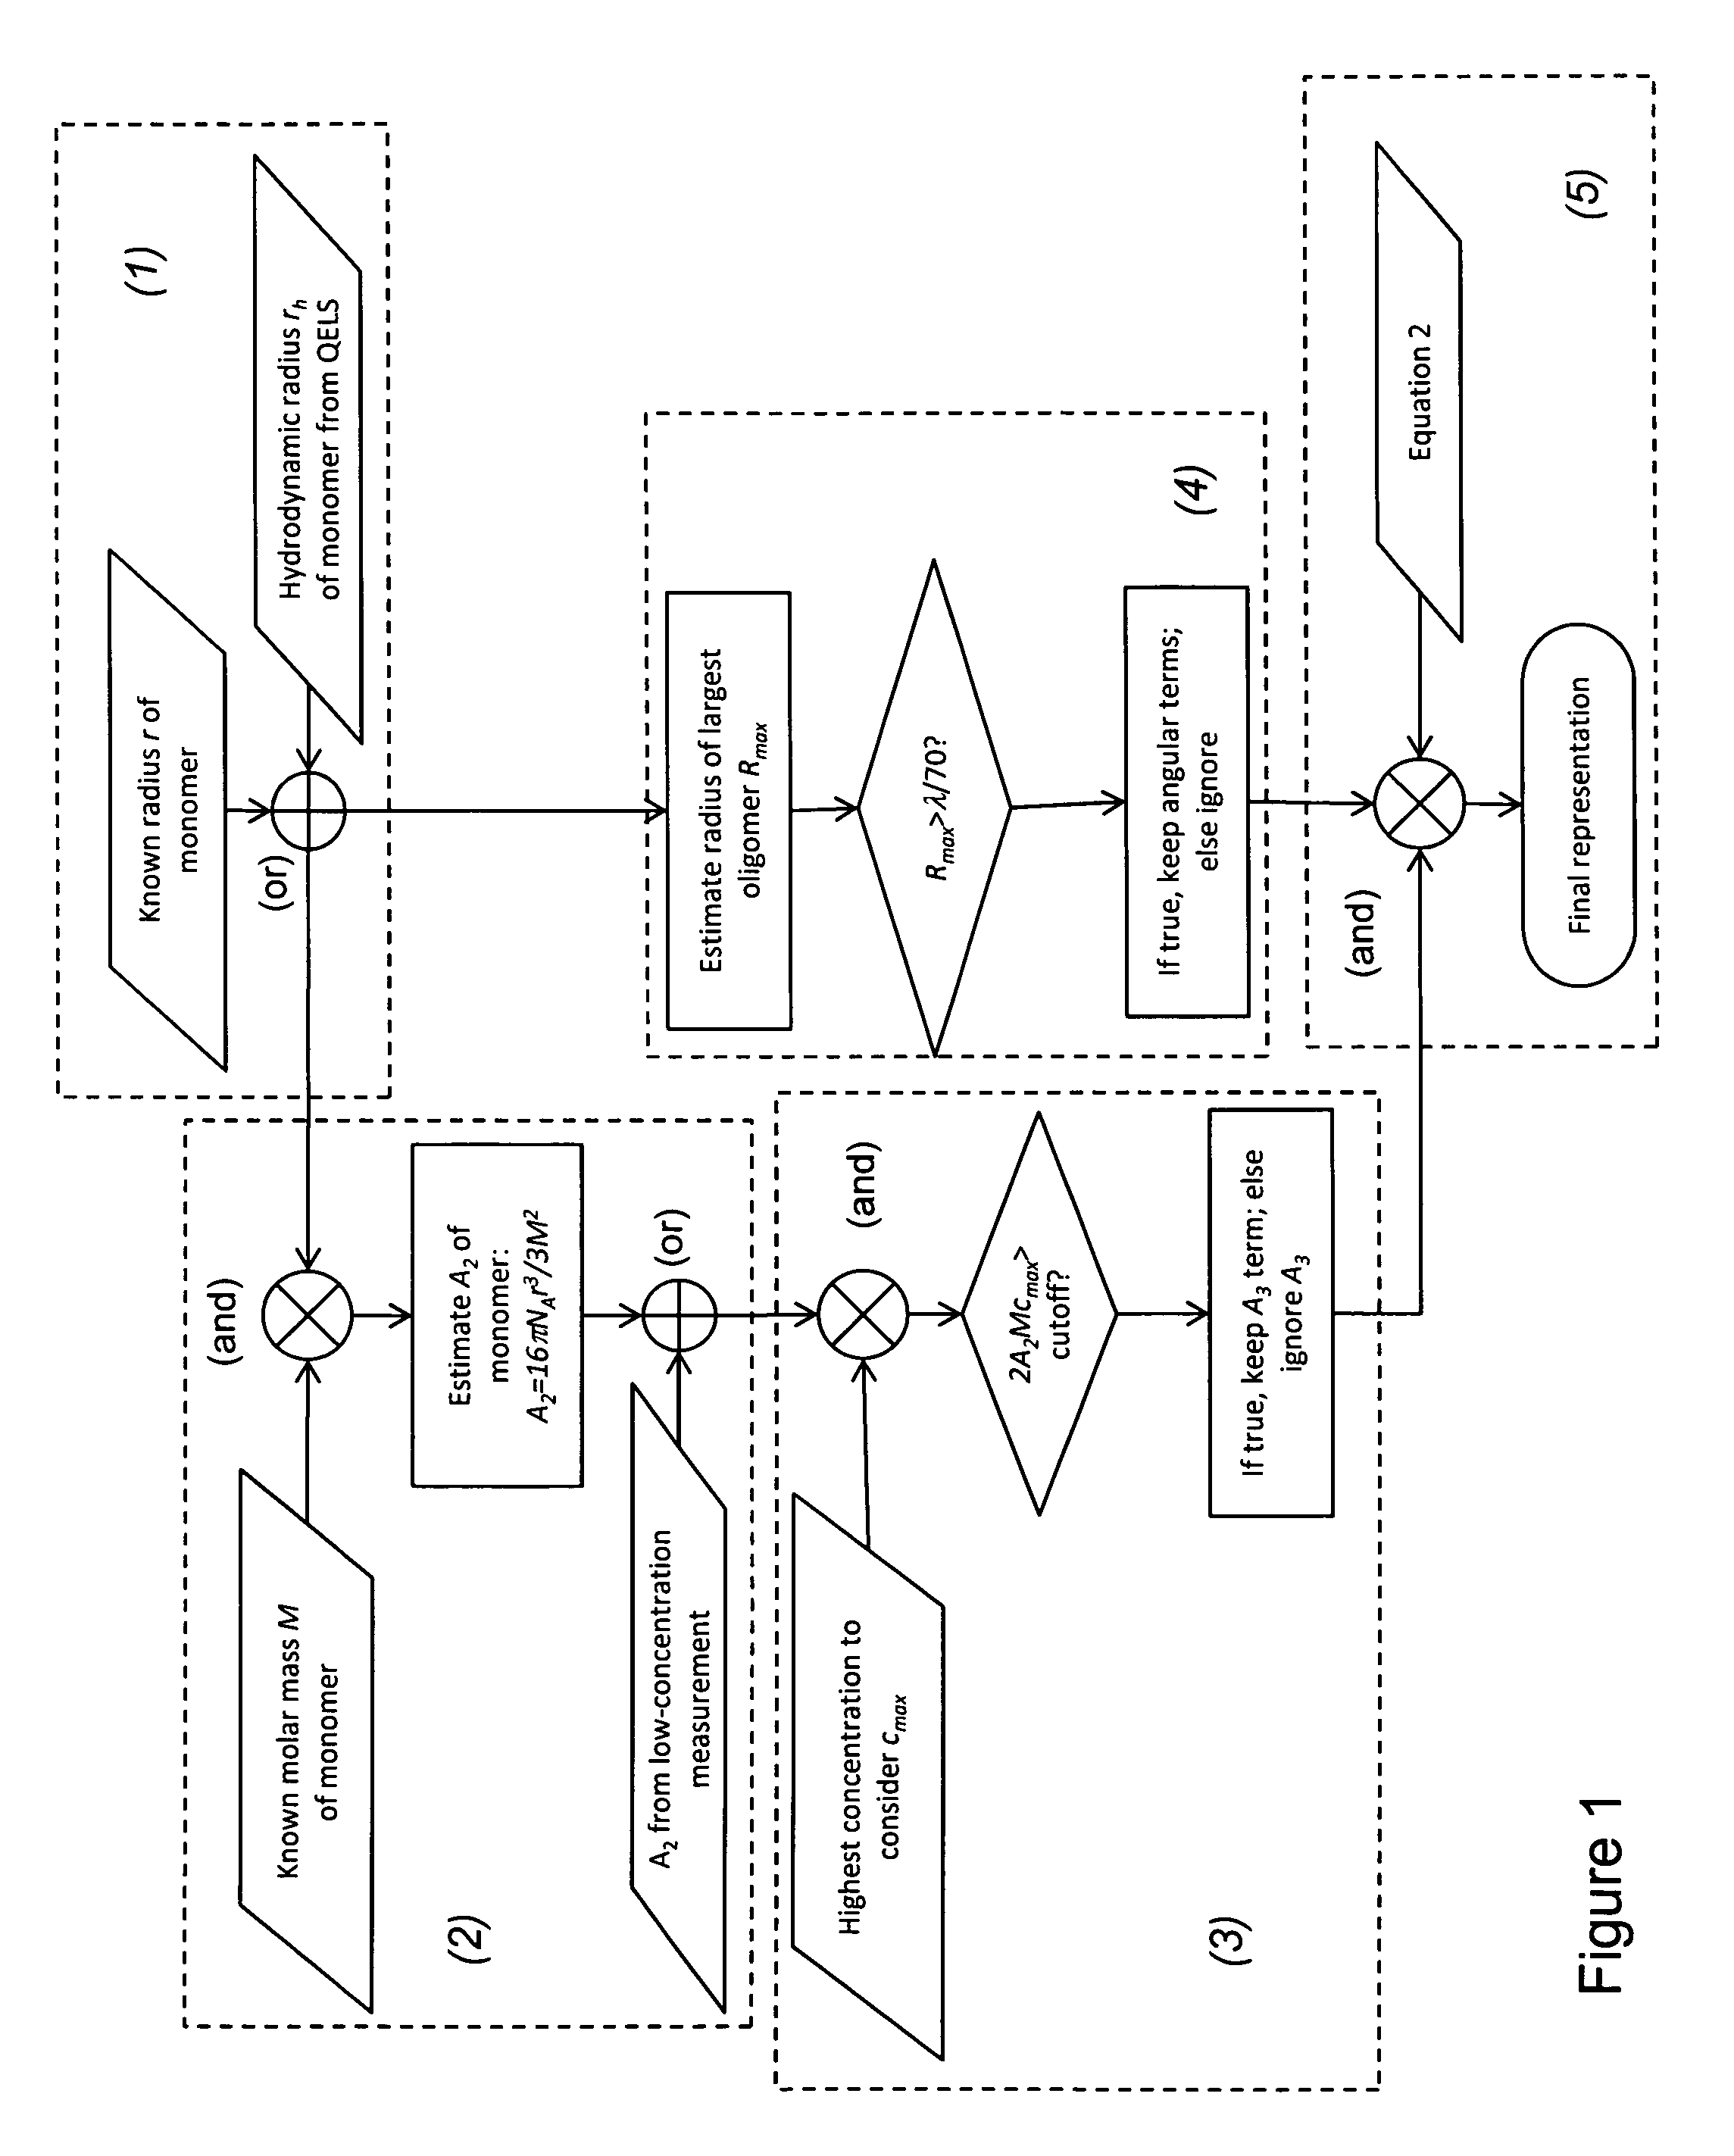 Method for characterizing reversible association of macromolecules at high concentration